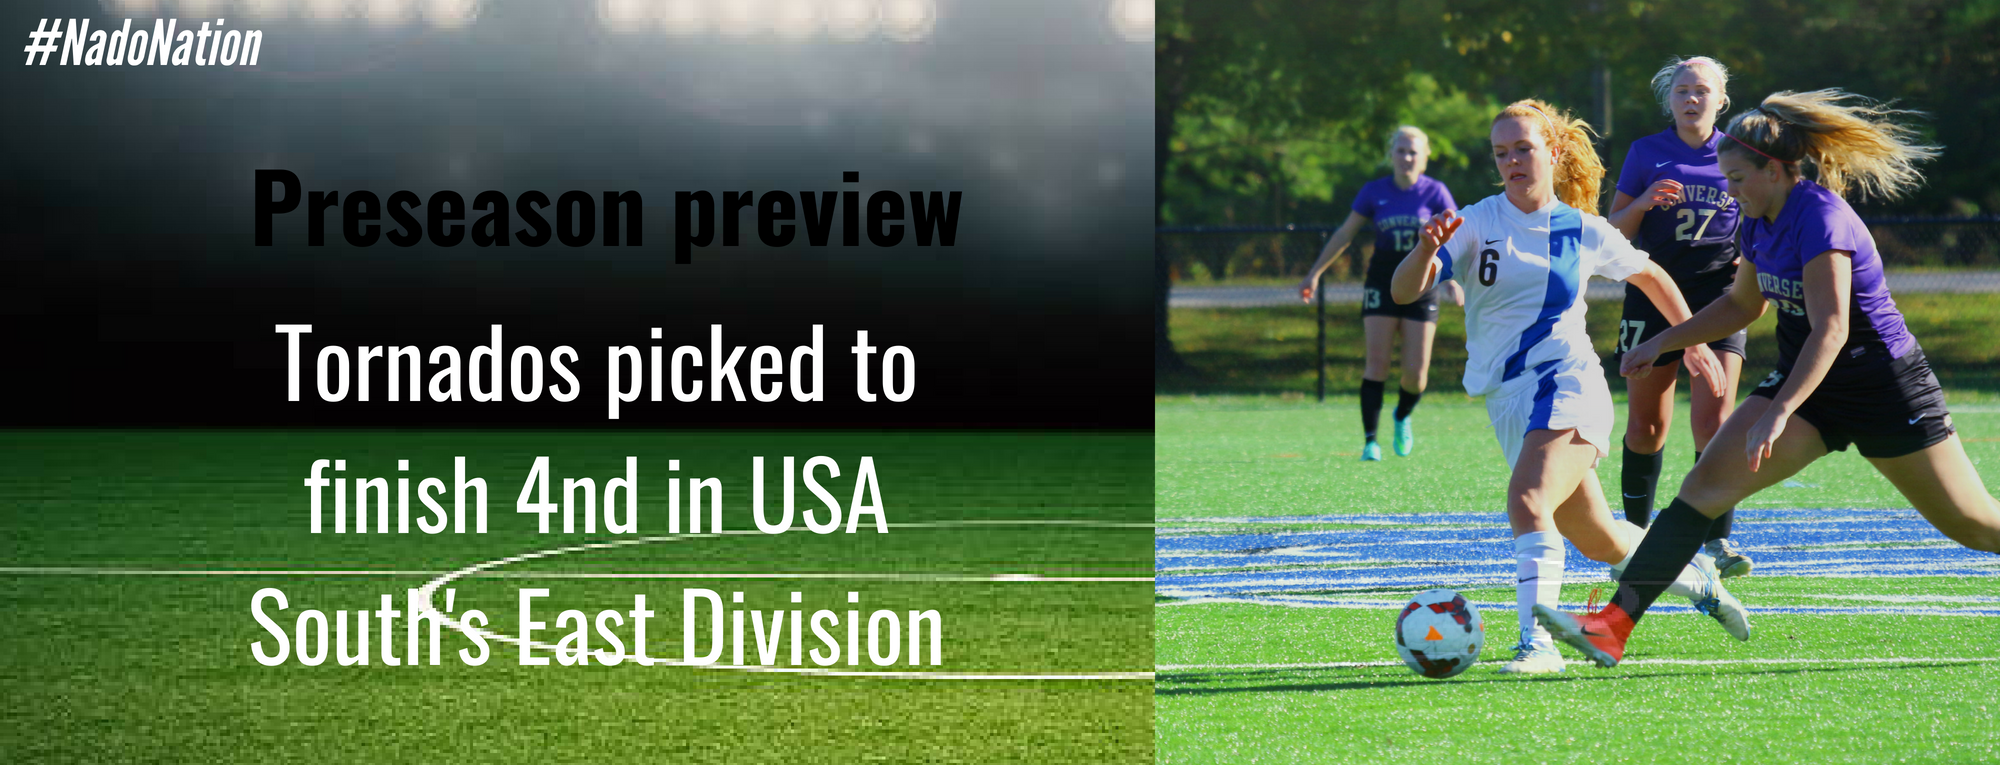 Women’s Soccer Preseason Preview: Tornados predicted to finish 4th in USA South's West Division